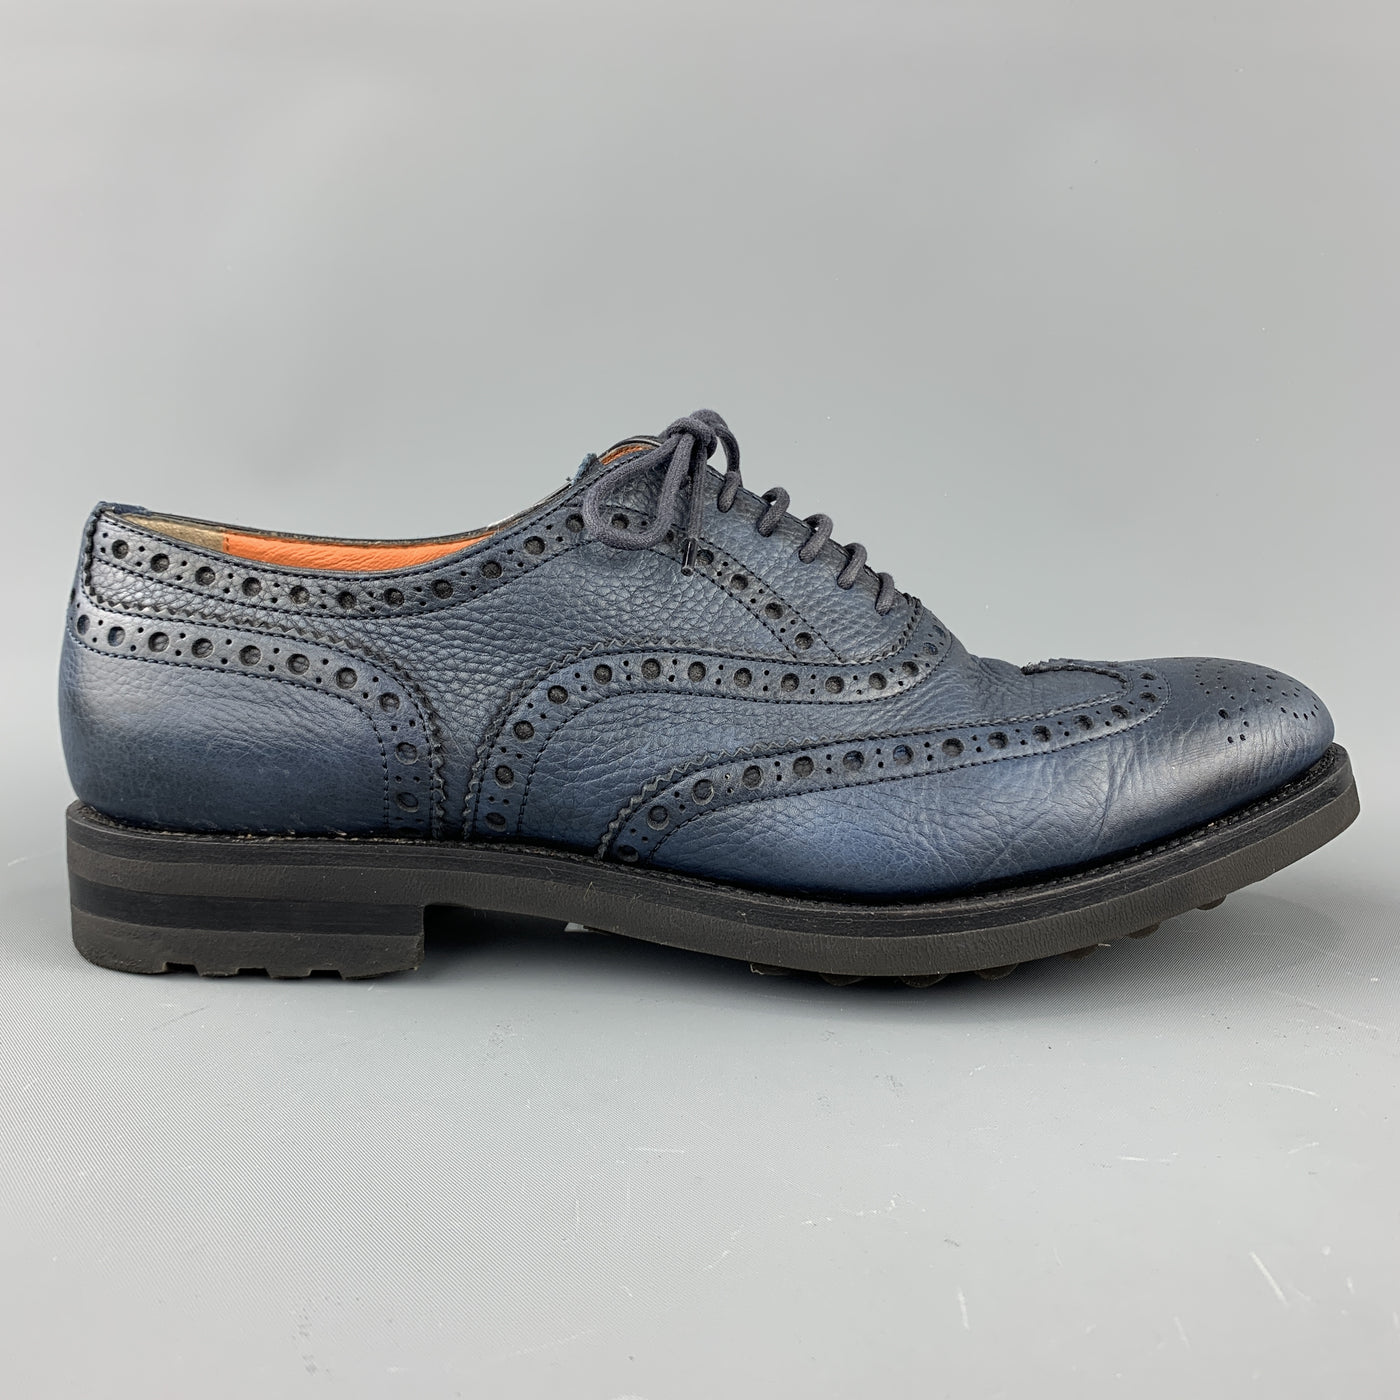 SANTONI Size 10 Navy Leather Wingtip Rubber Sole Lace Up Brogues